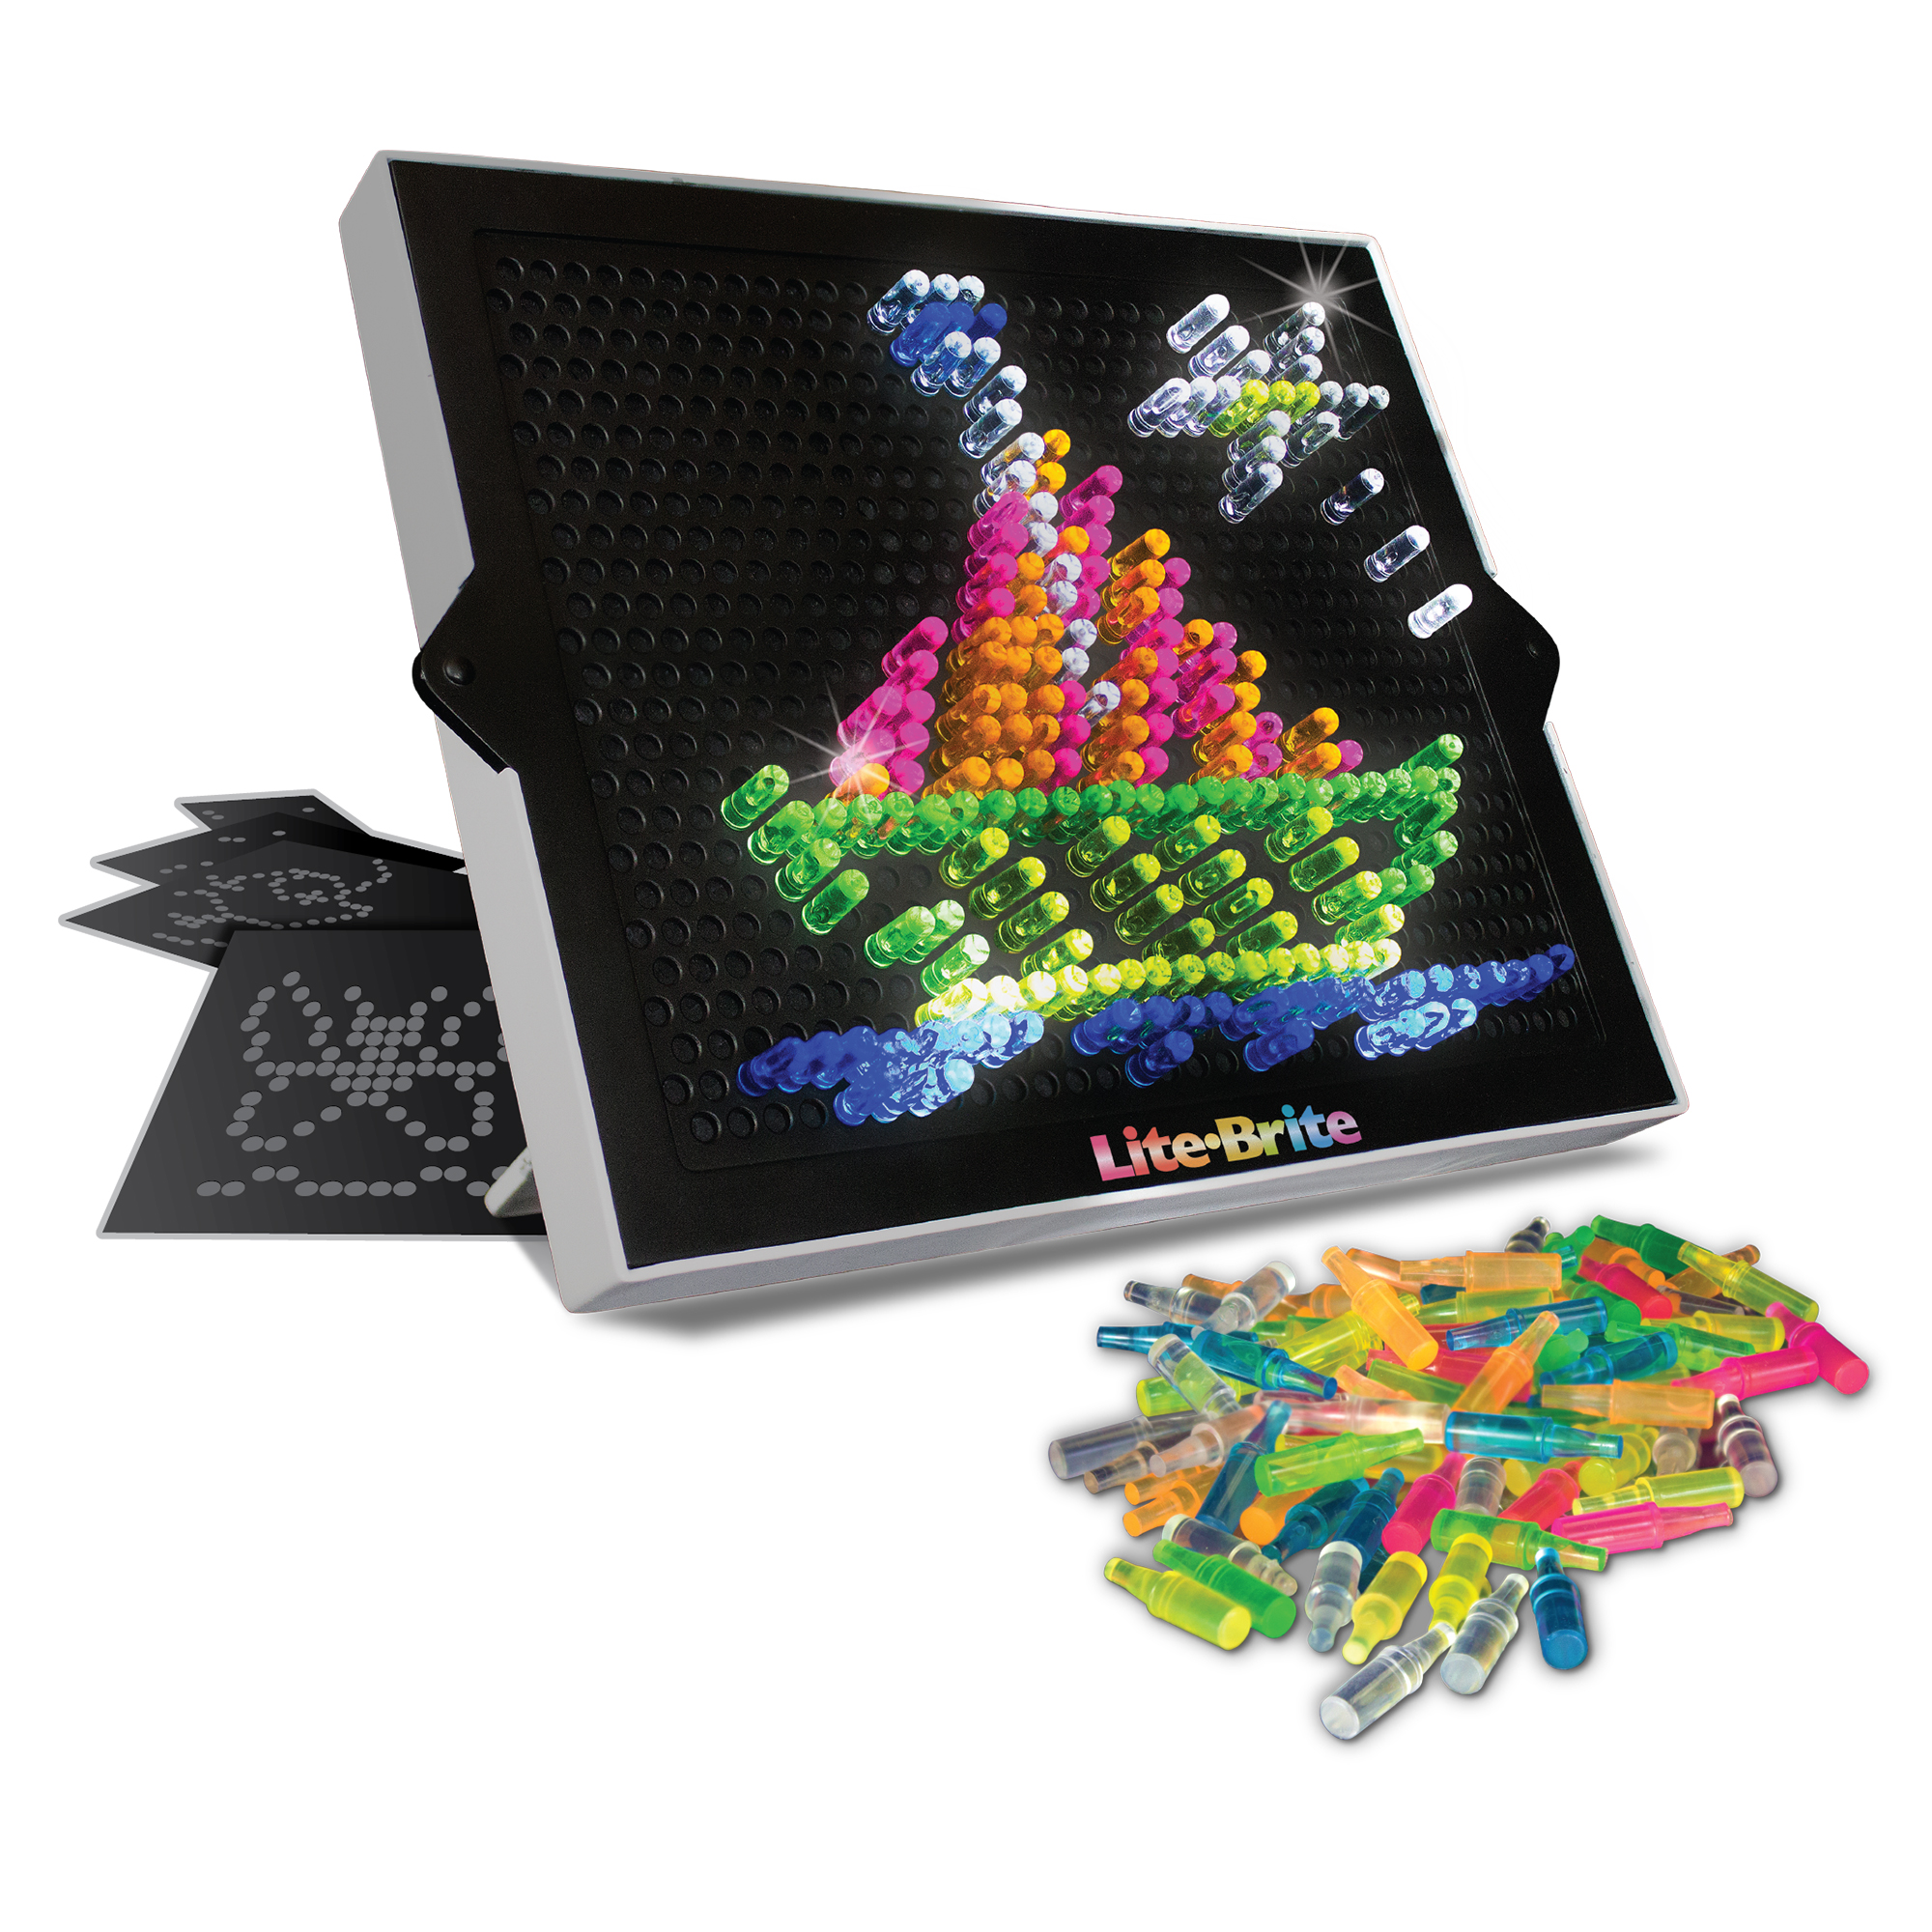 Lite Brite - Ultimate Classic - Light up creative activity toy